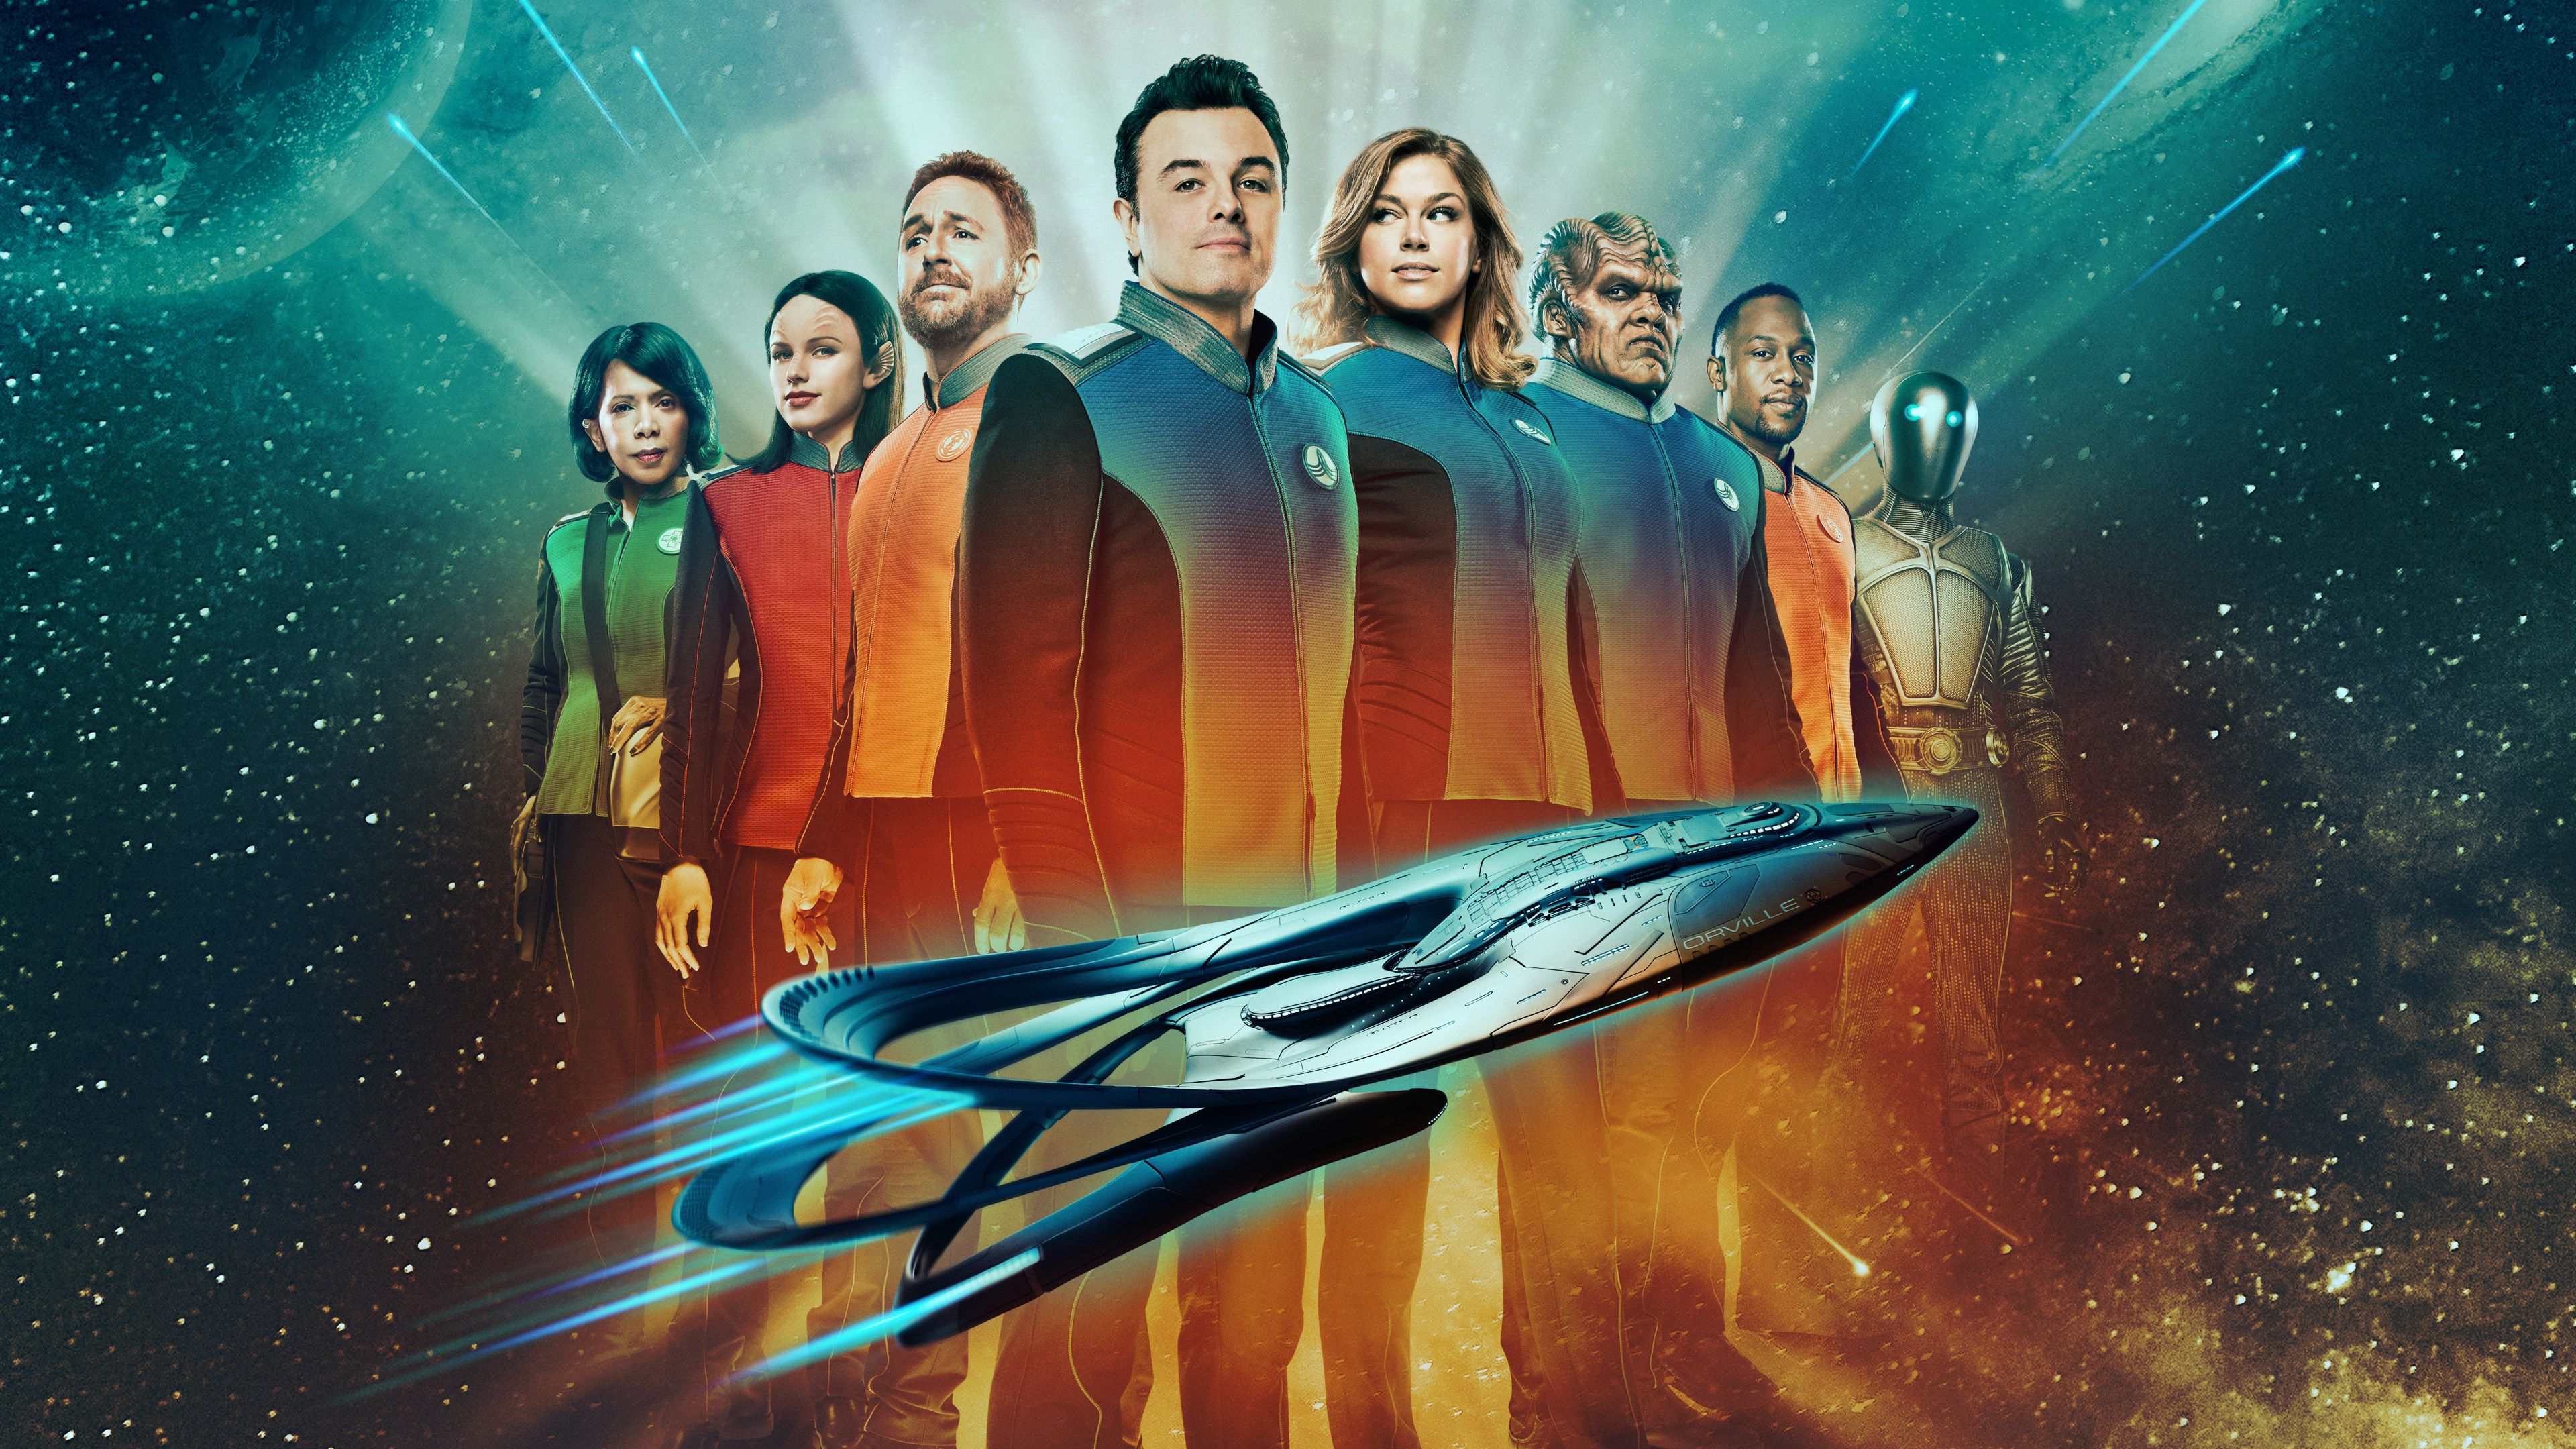 The Orville 4k, HD Tv Shows, 4k Wallpaper, Image, Background